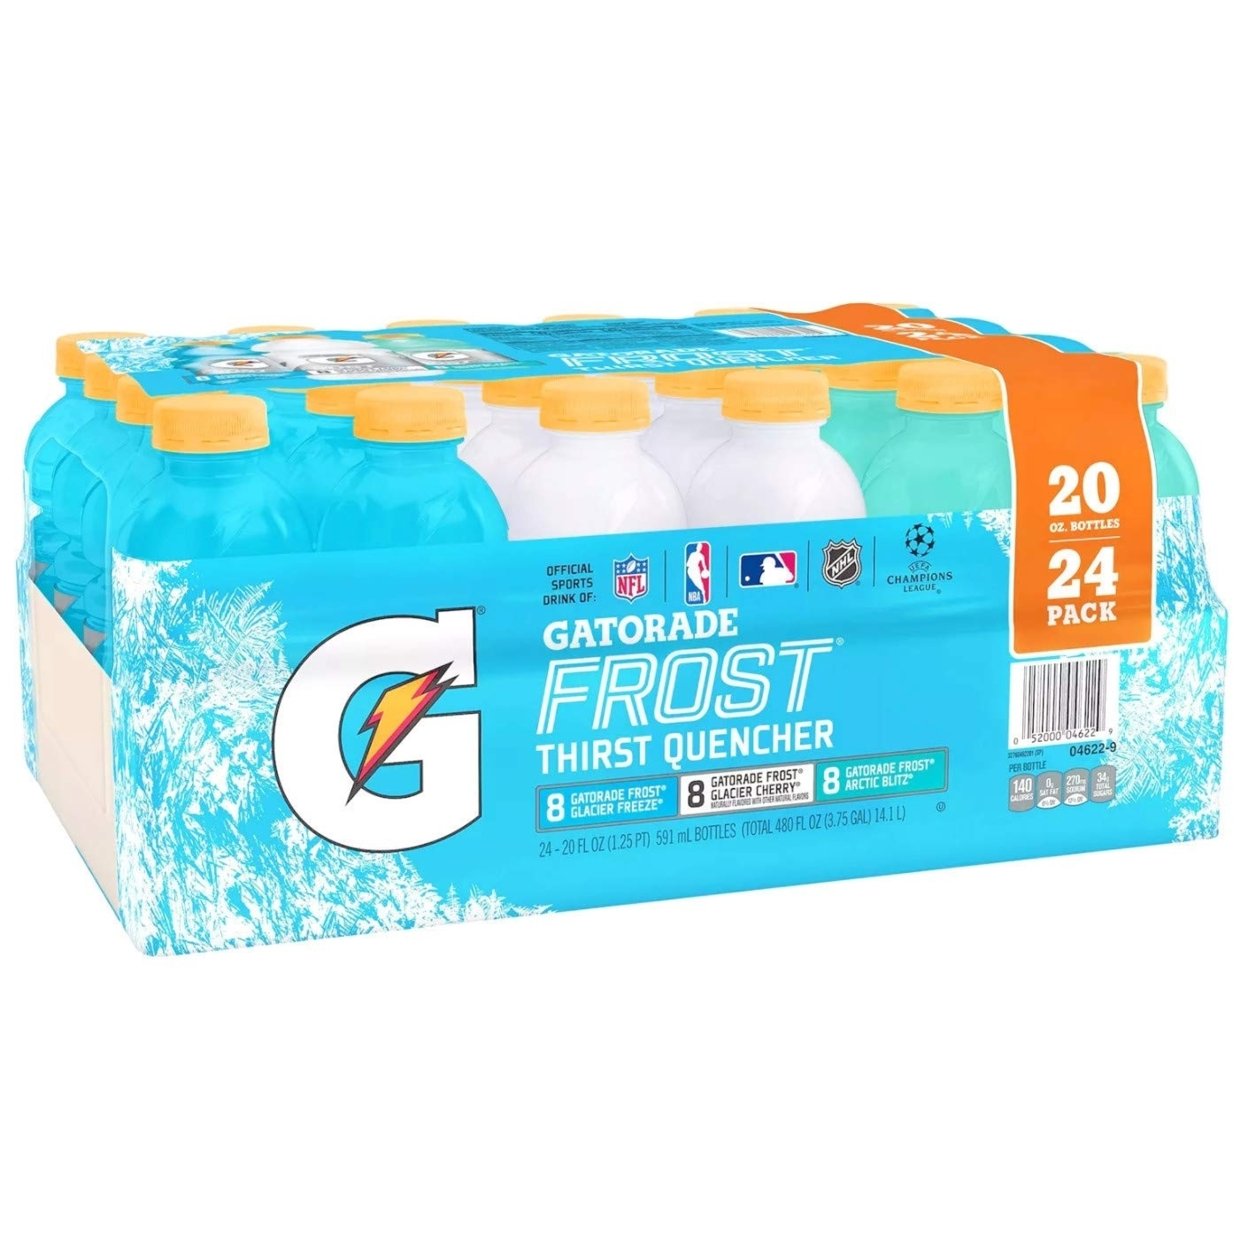 Gatorade Frost Thirst Quencher, Variety Pack, 20 Fluid Ounce (Pack Of 24)